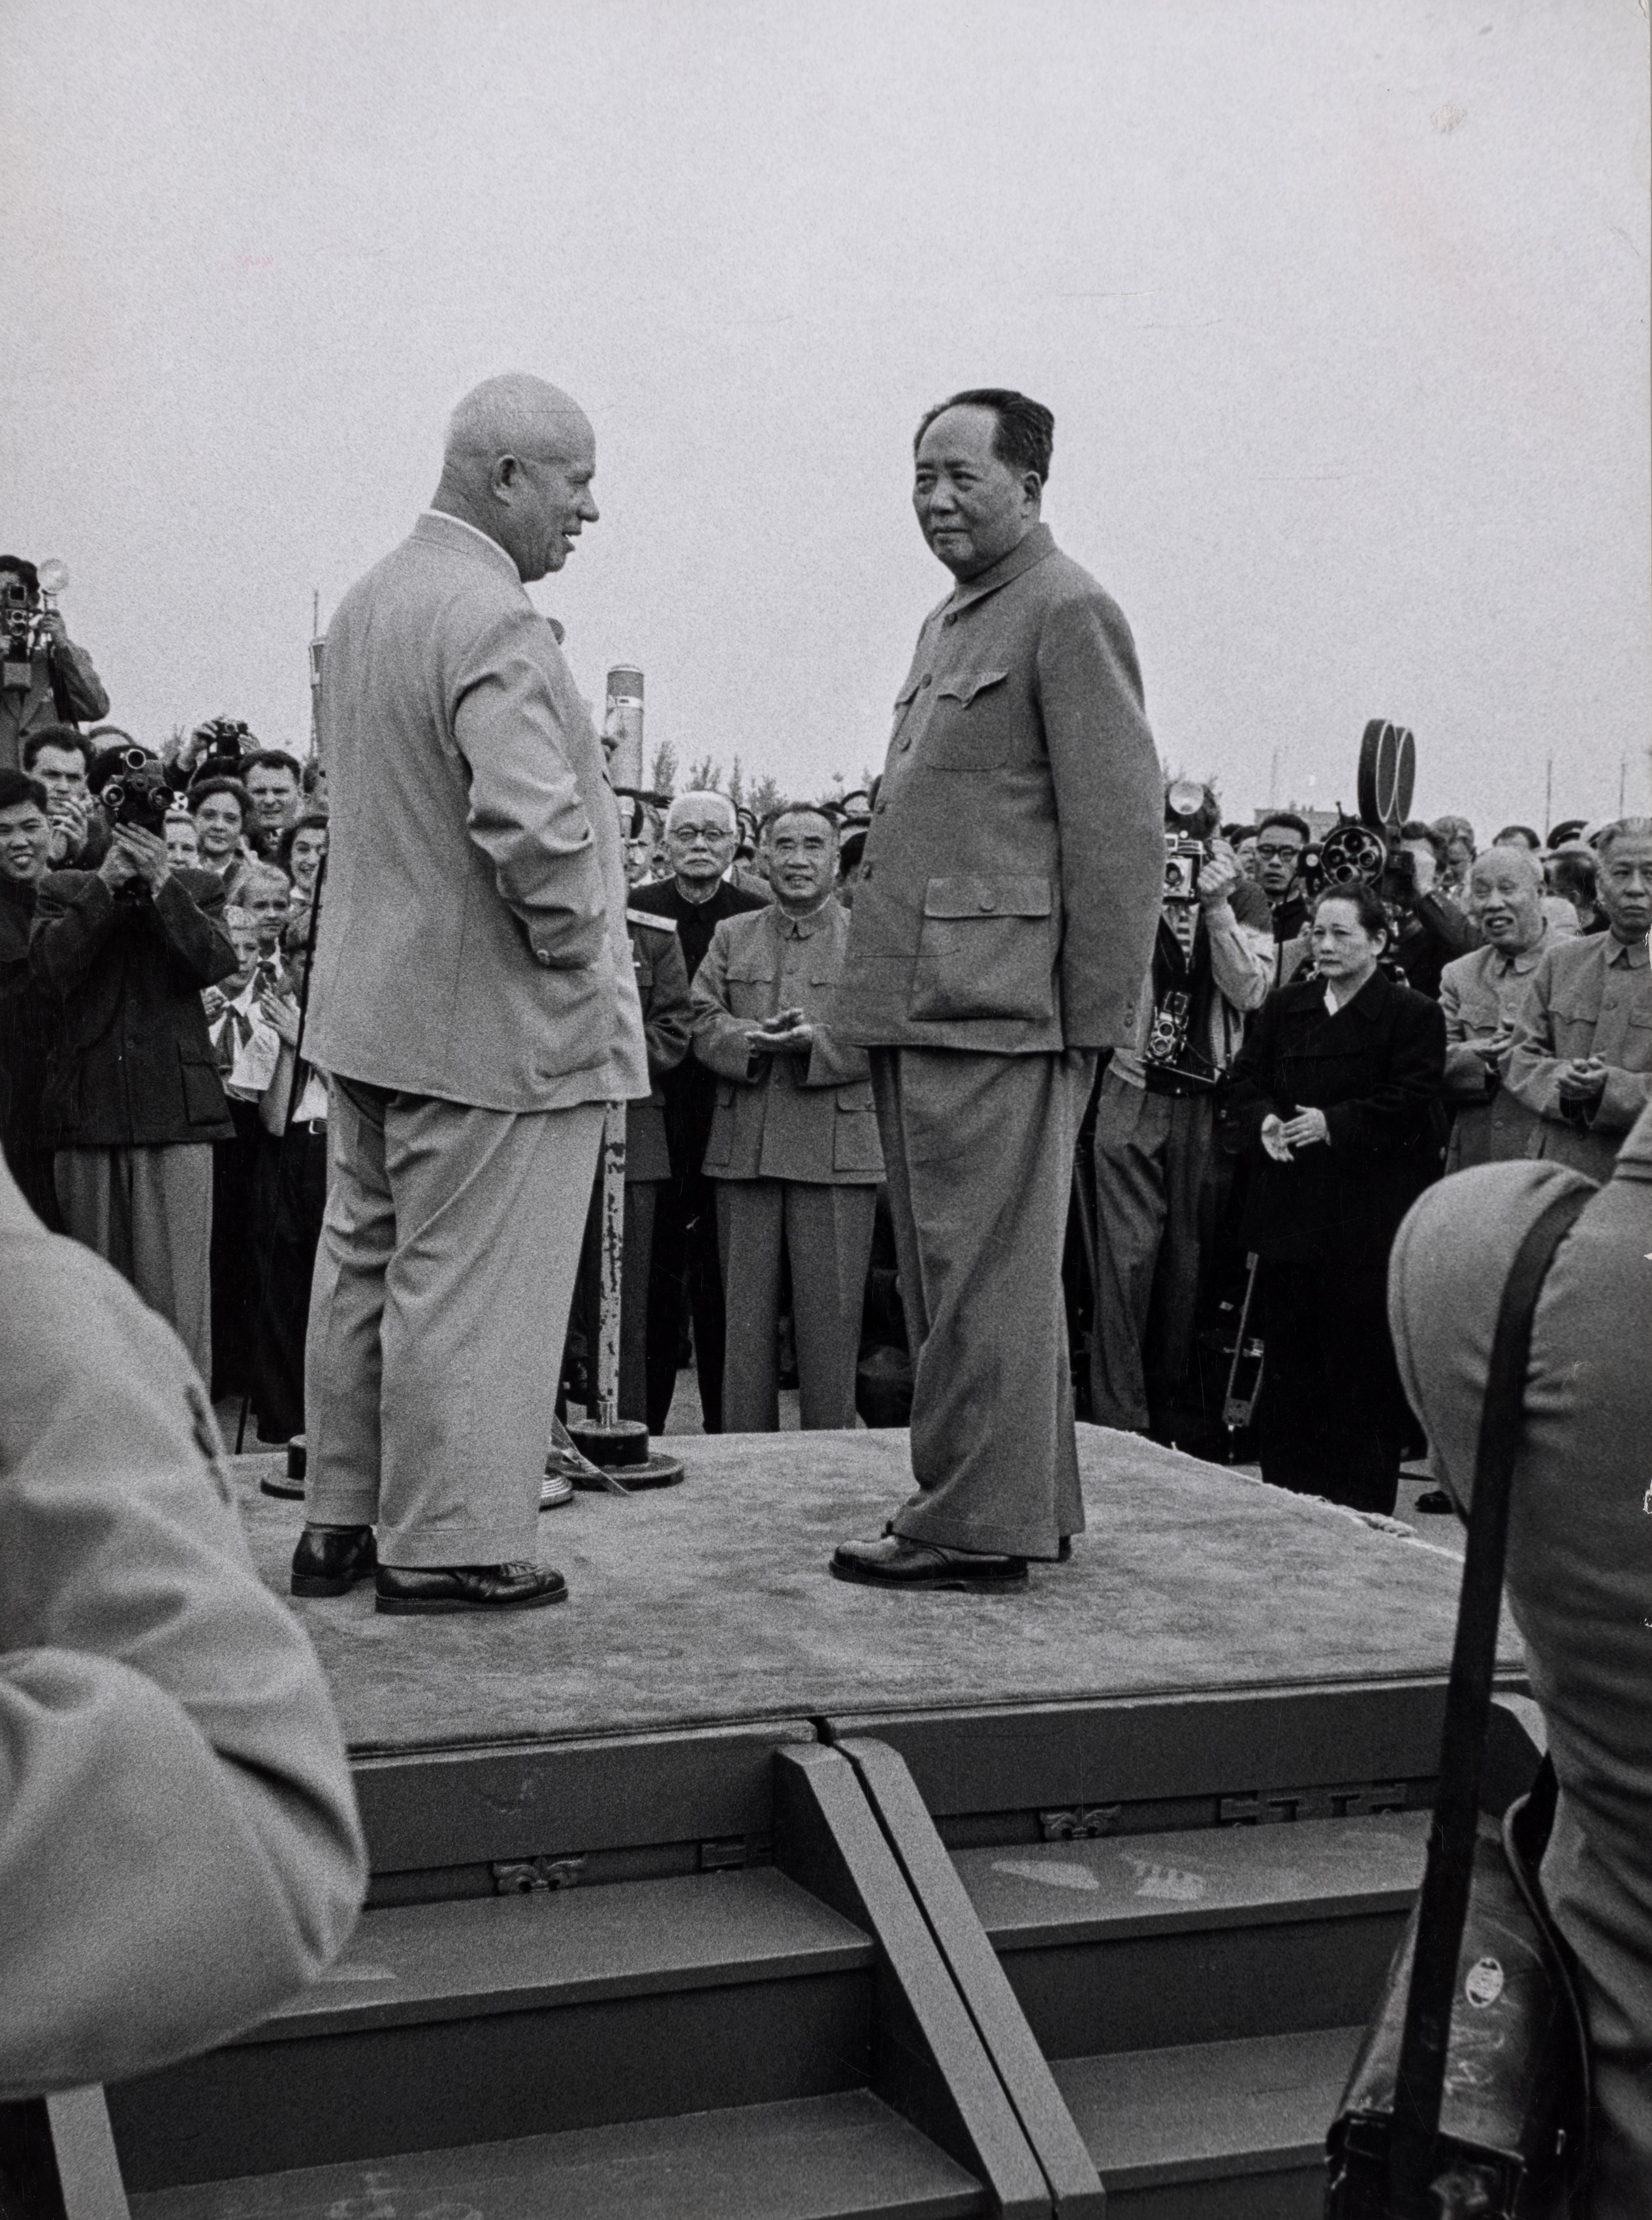 Chairman Mao with Nikita Khrushchev on Stage